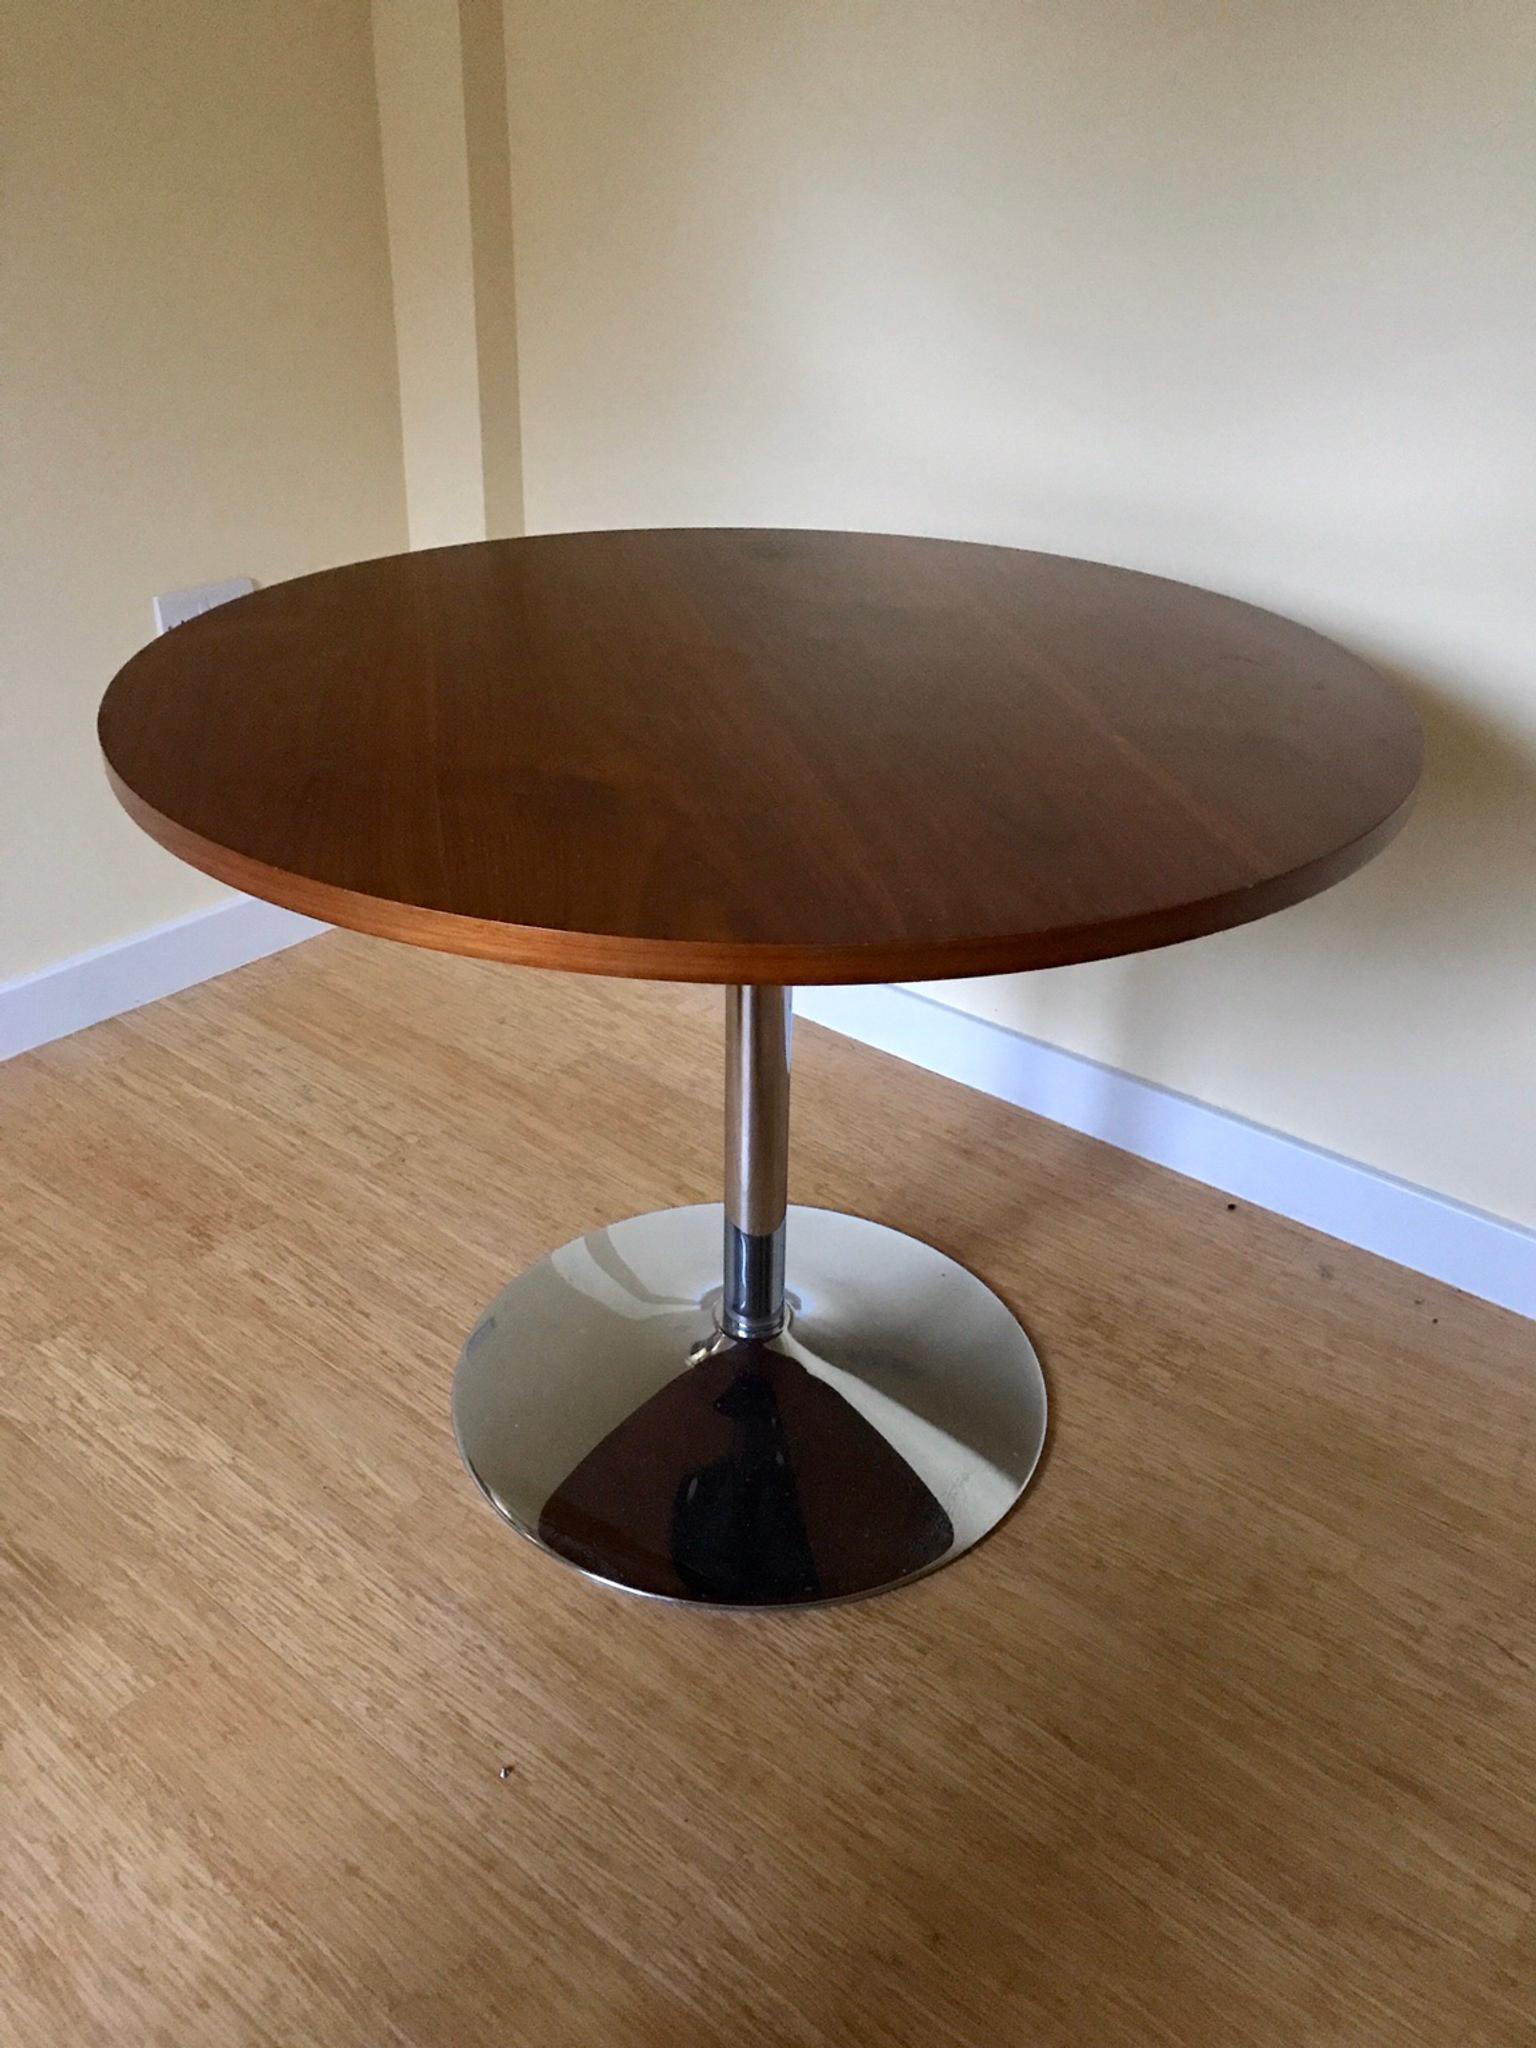 Walnut Round Dining Table In N2 London For 100 00 For Sale Shpock